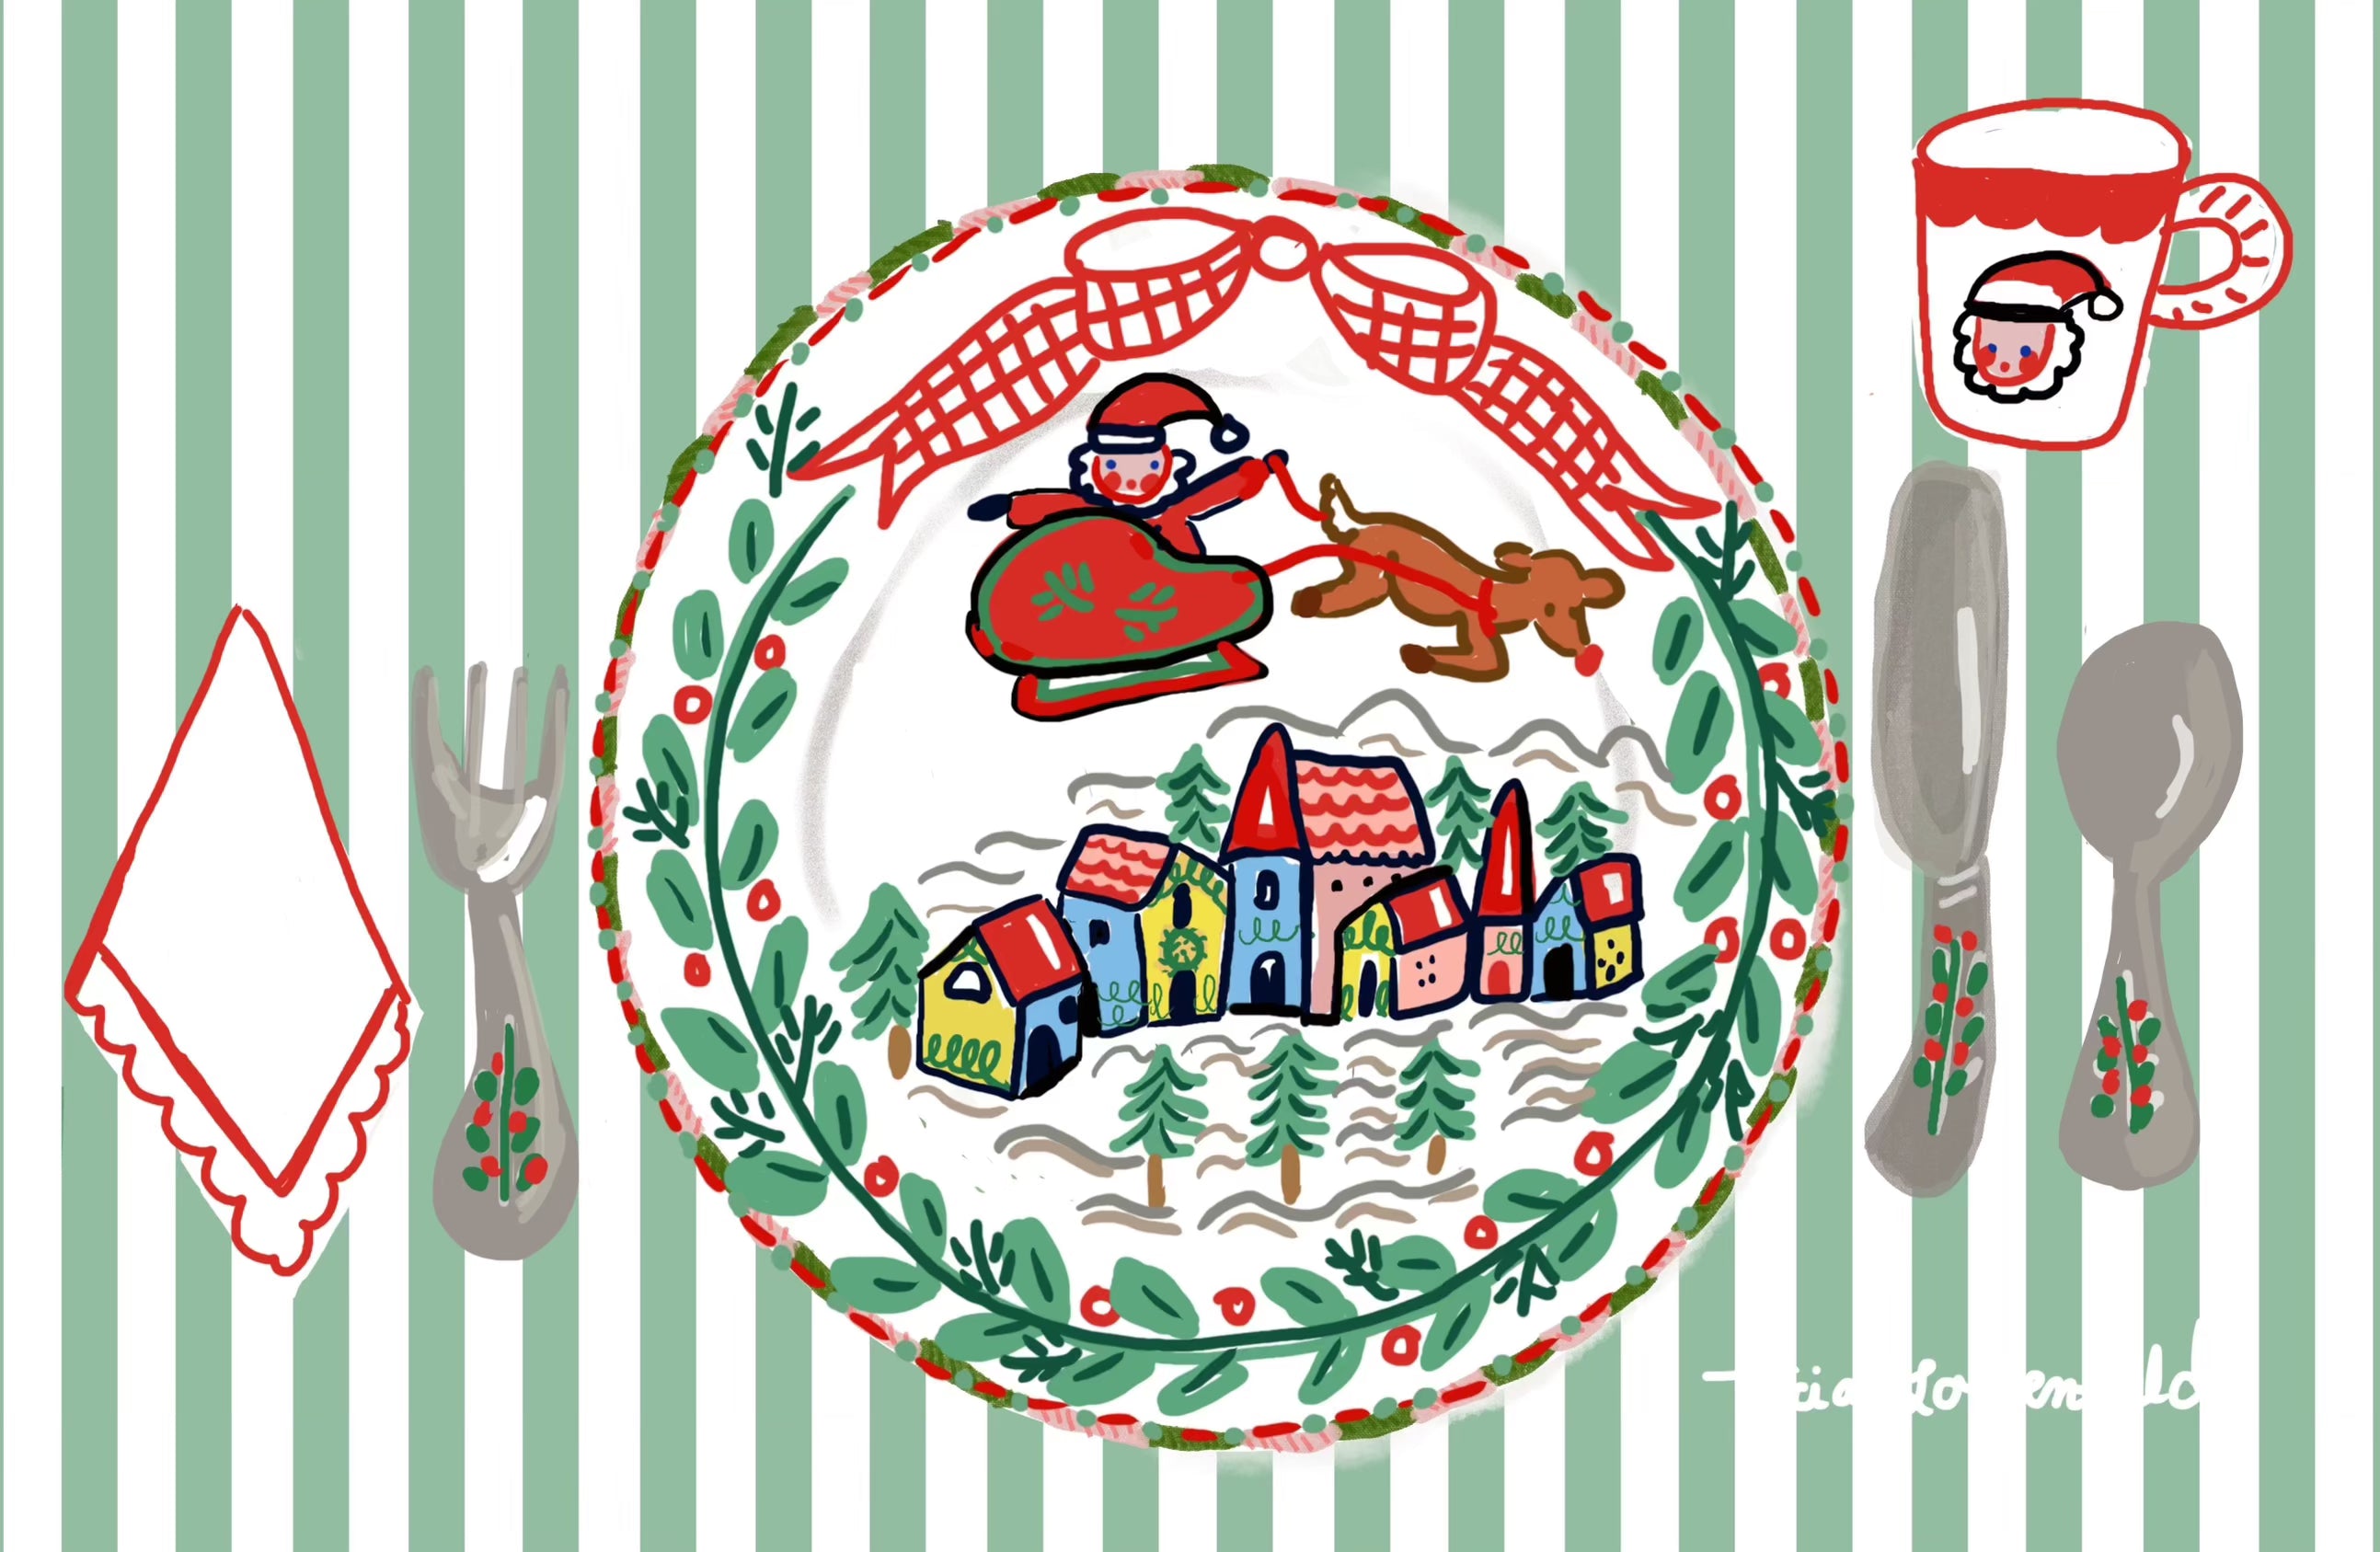 Set of 24 paper placemats - Santa and village - Premium Placemat from Tricia Lowenfield Design 